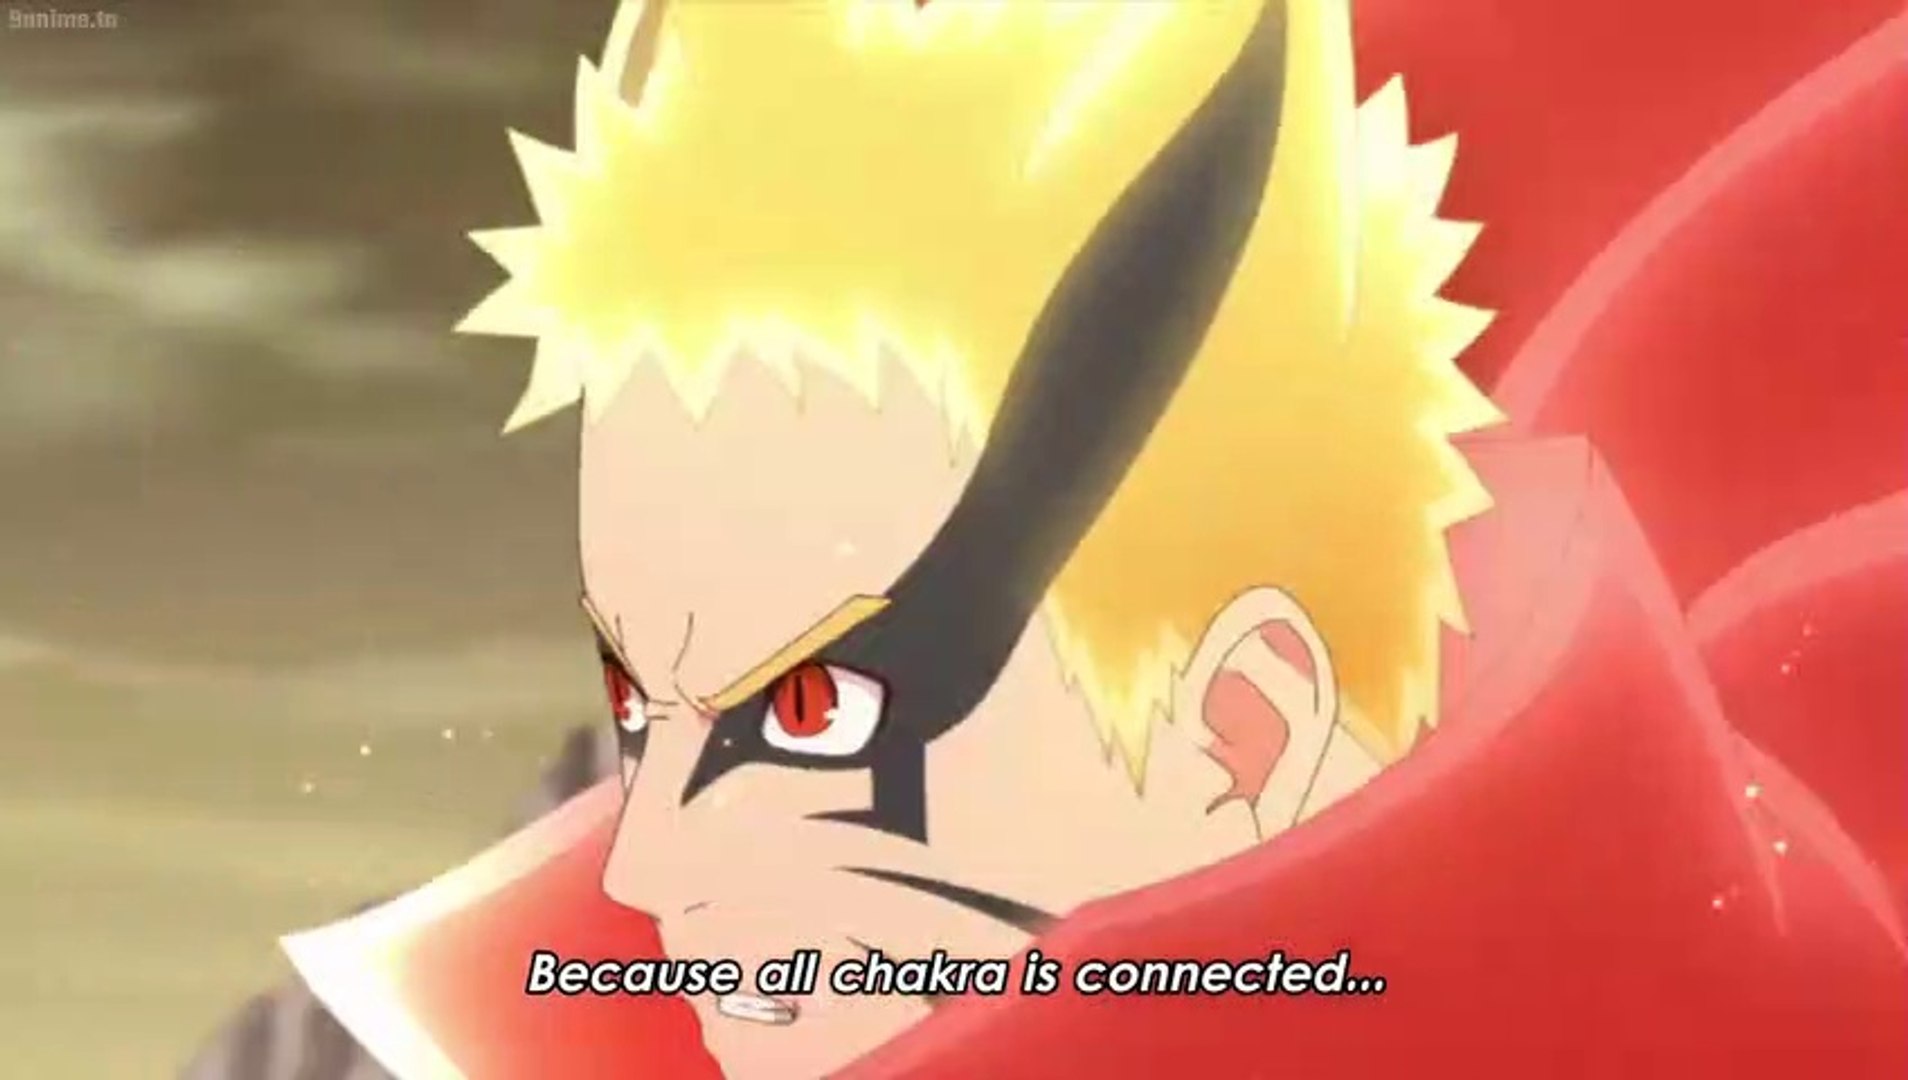 Boruto Episode 219: Isshiki's chapter ends but a new threat emerges